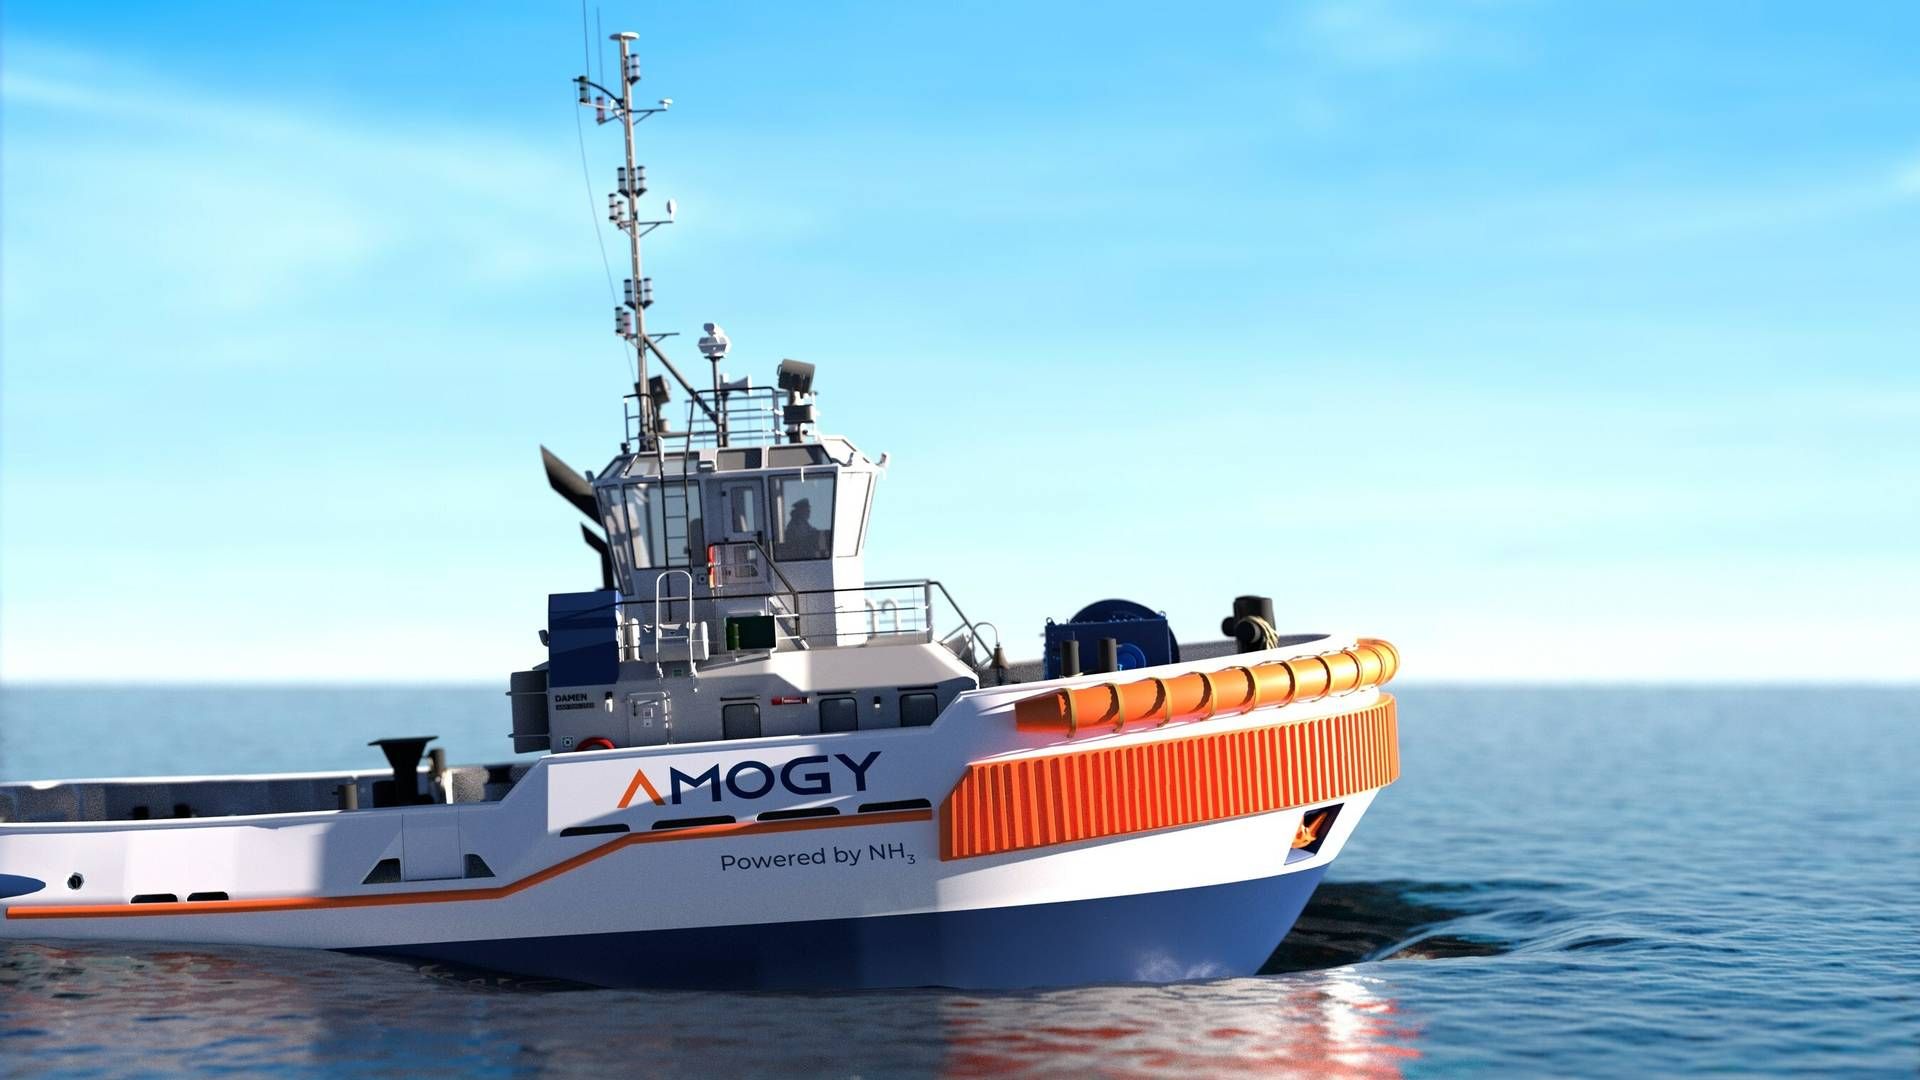 A reproduction of Amogy's ammonia-driven tugboat. | Photo: Amogy